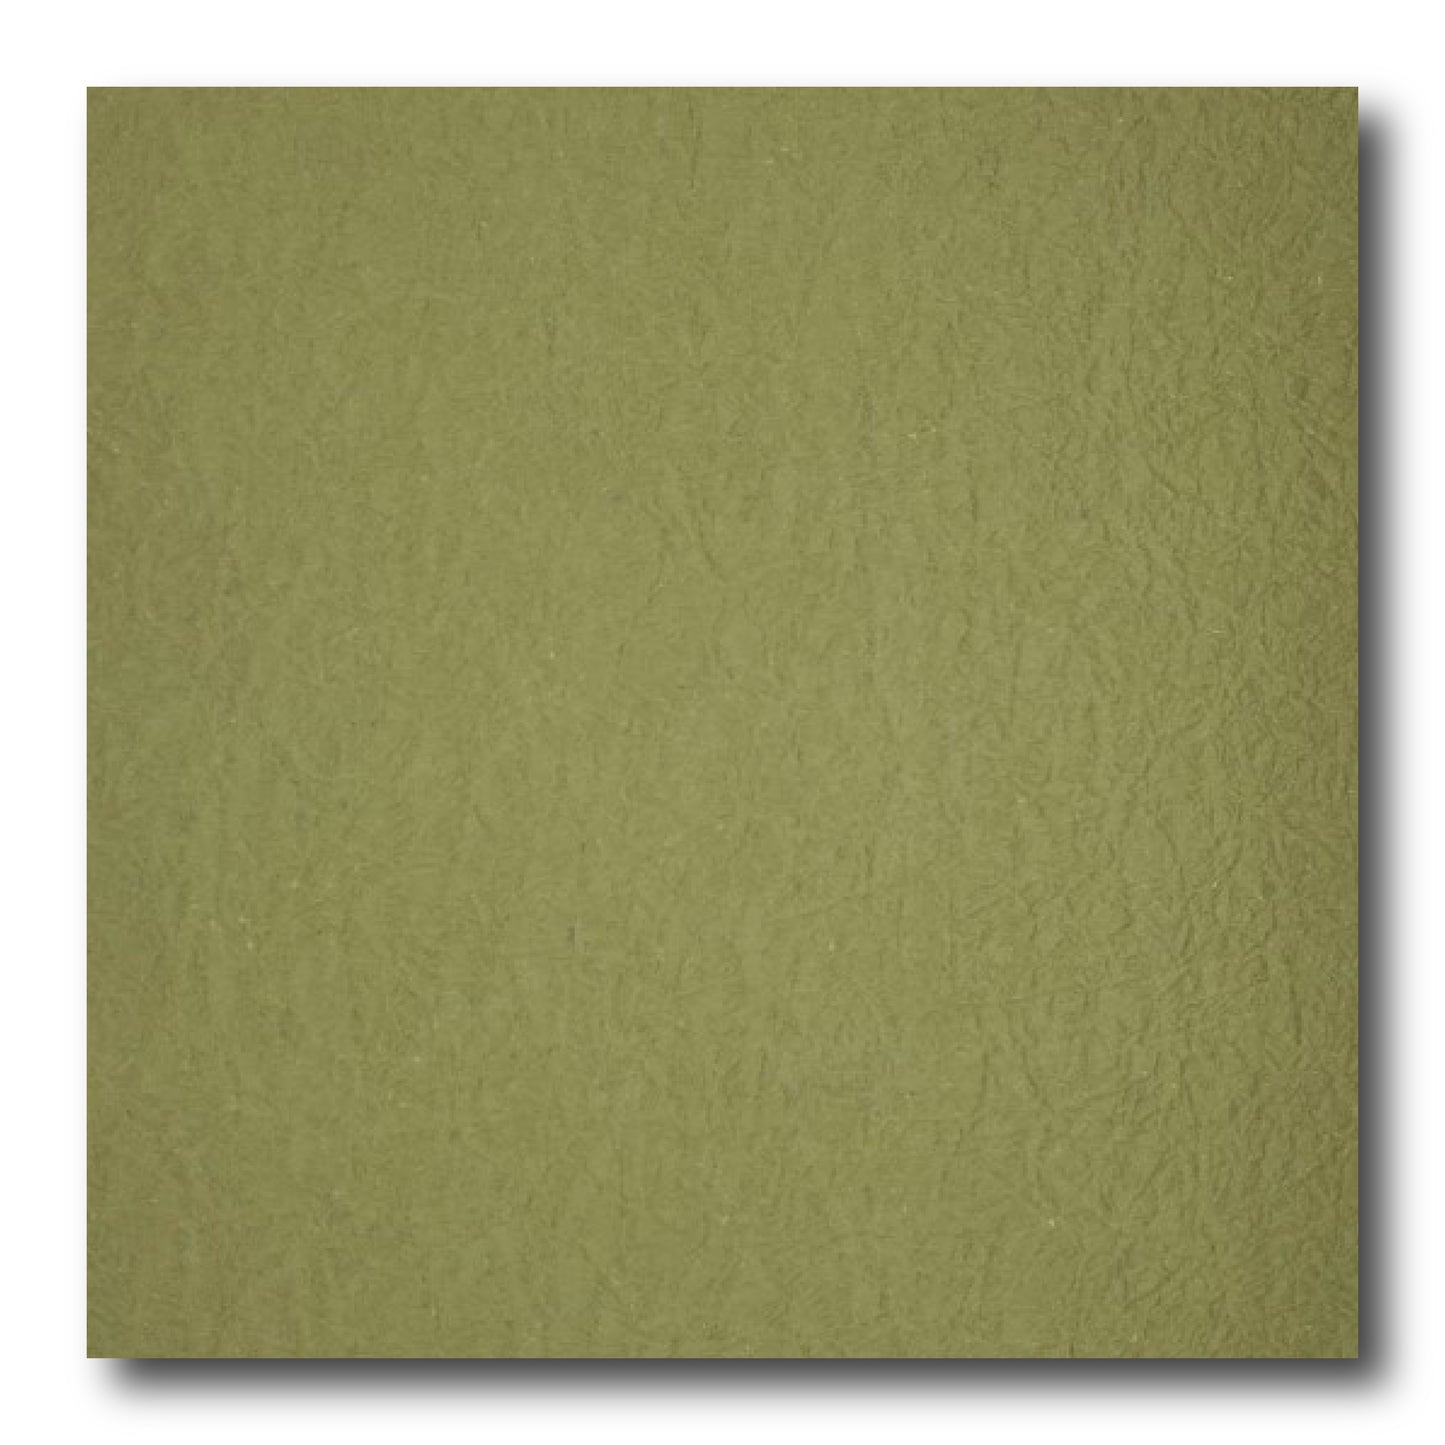 Echizen Momigami (Dual Color: Olive Green/White)(Sold per sheet) 35cm